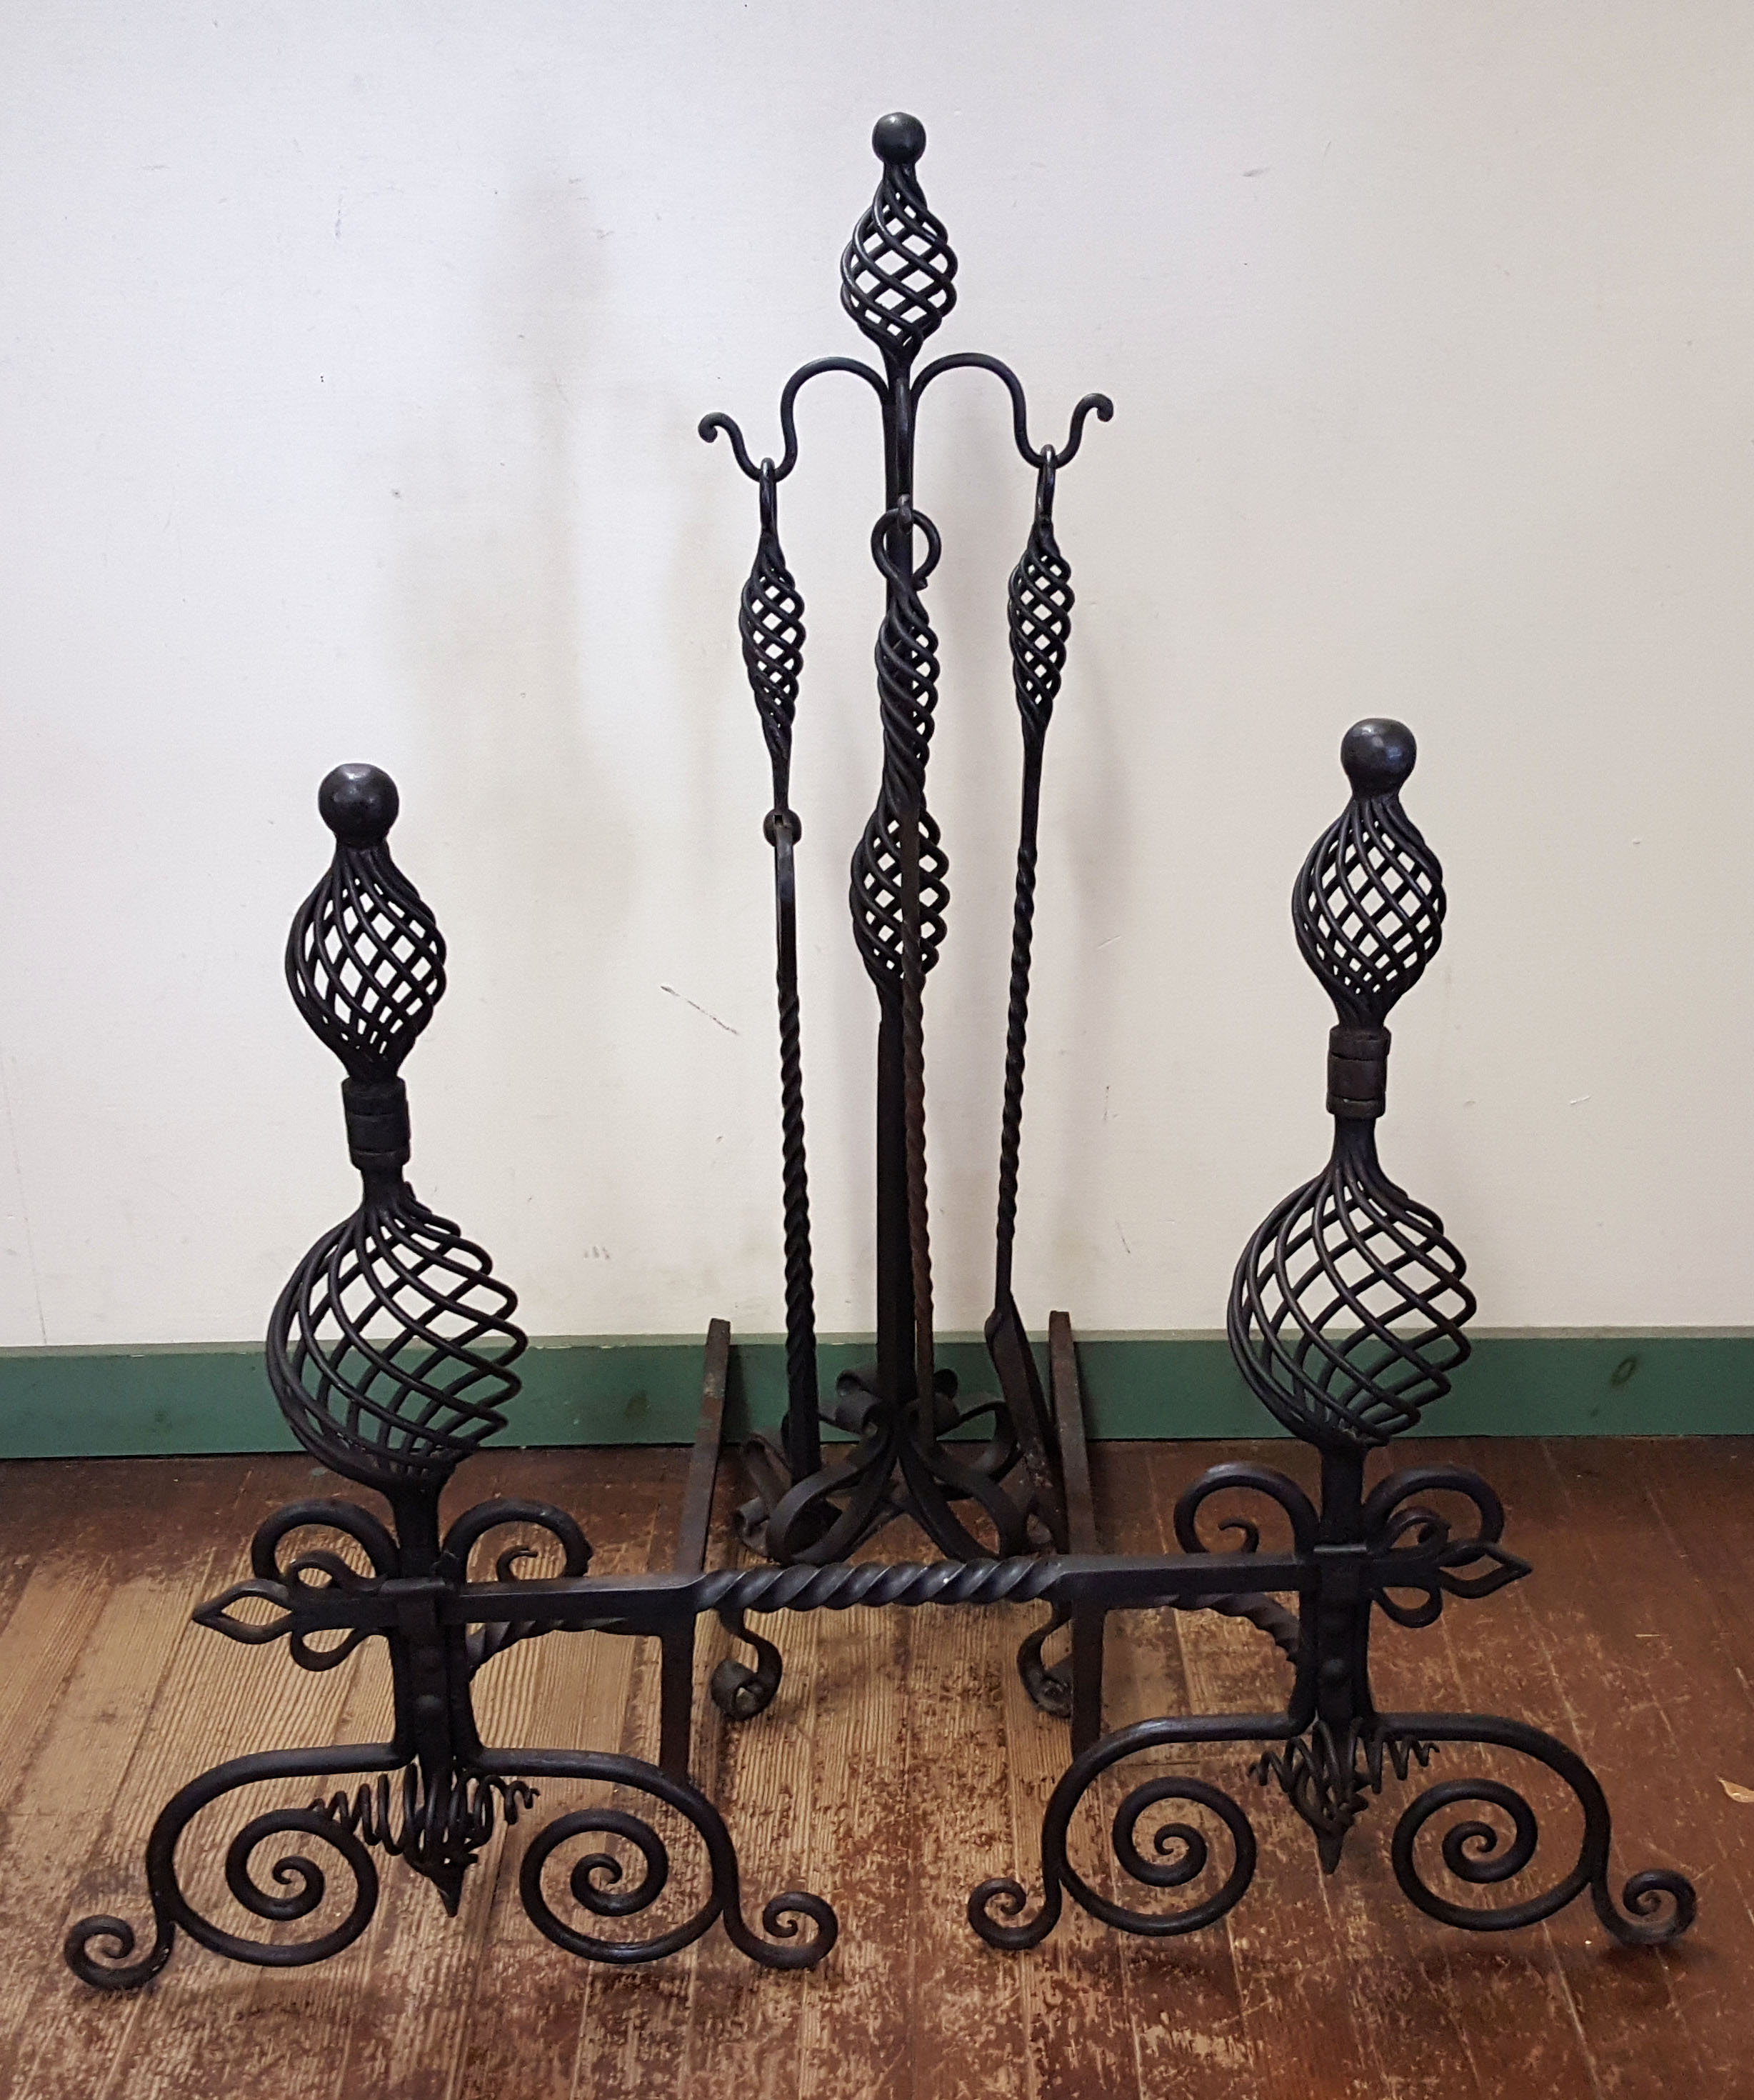 ANDIRONS AND TOOLS